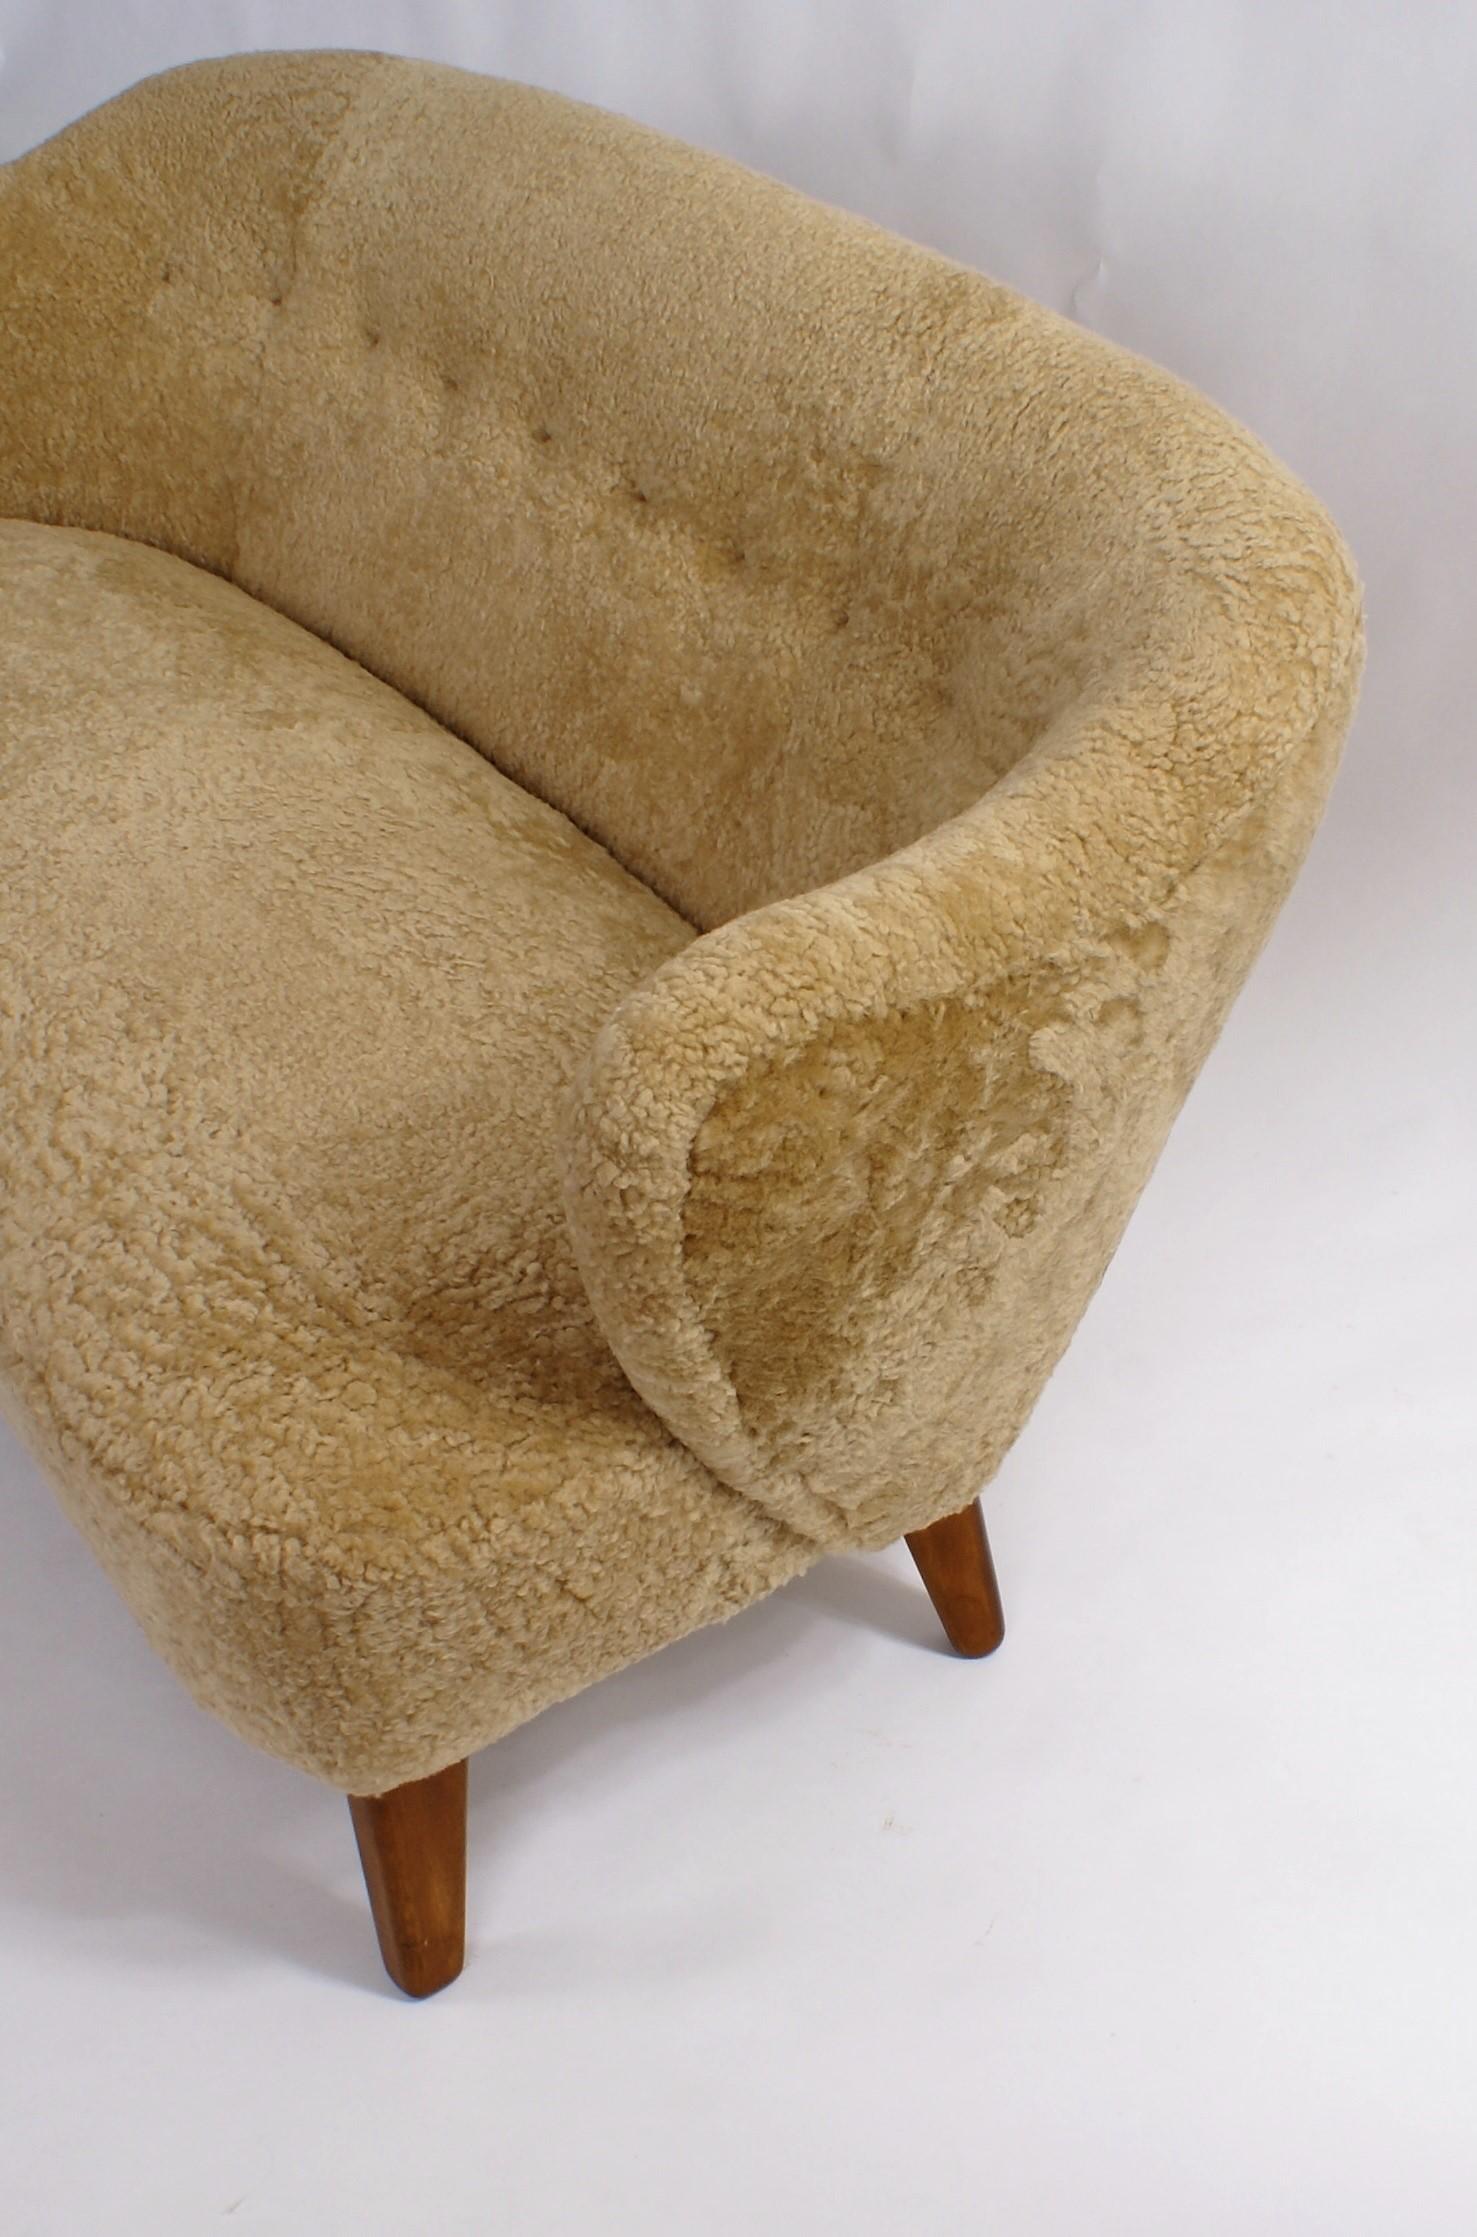 Flemming Lassen, two-seat settee for master cabinetmaker Jacob Kjær, Copenhagen. Natural/honey colored sheepskin upholstery, leather buttons and stained ash legs. Designed 1940.

Please view 1stdibs item reference number LU1081213317962 for pair of